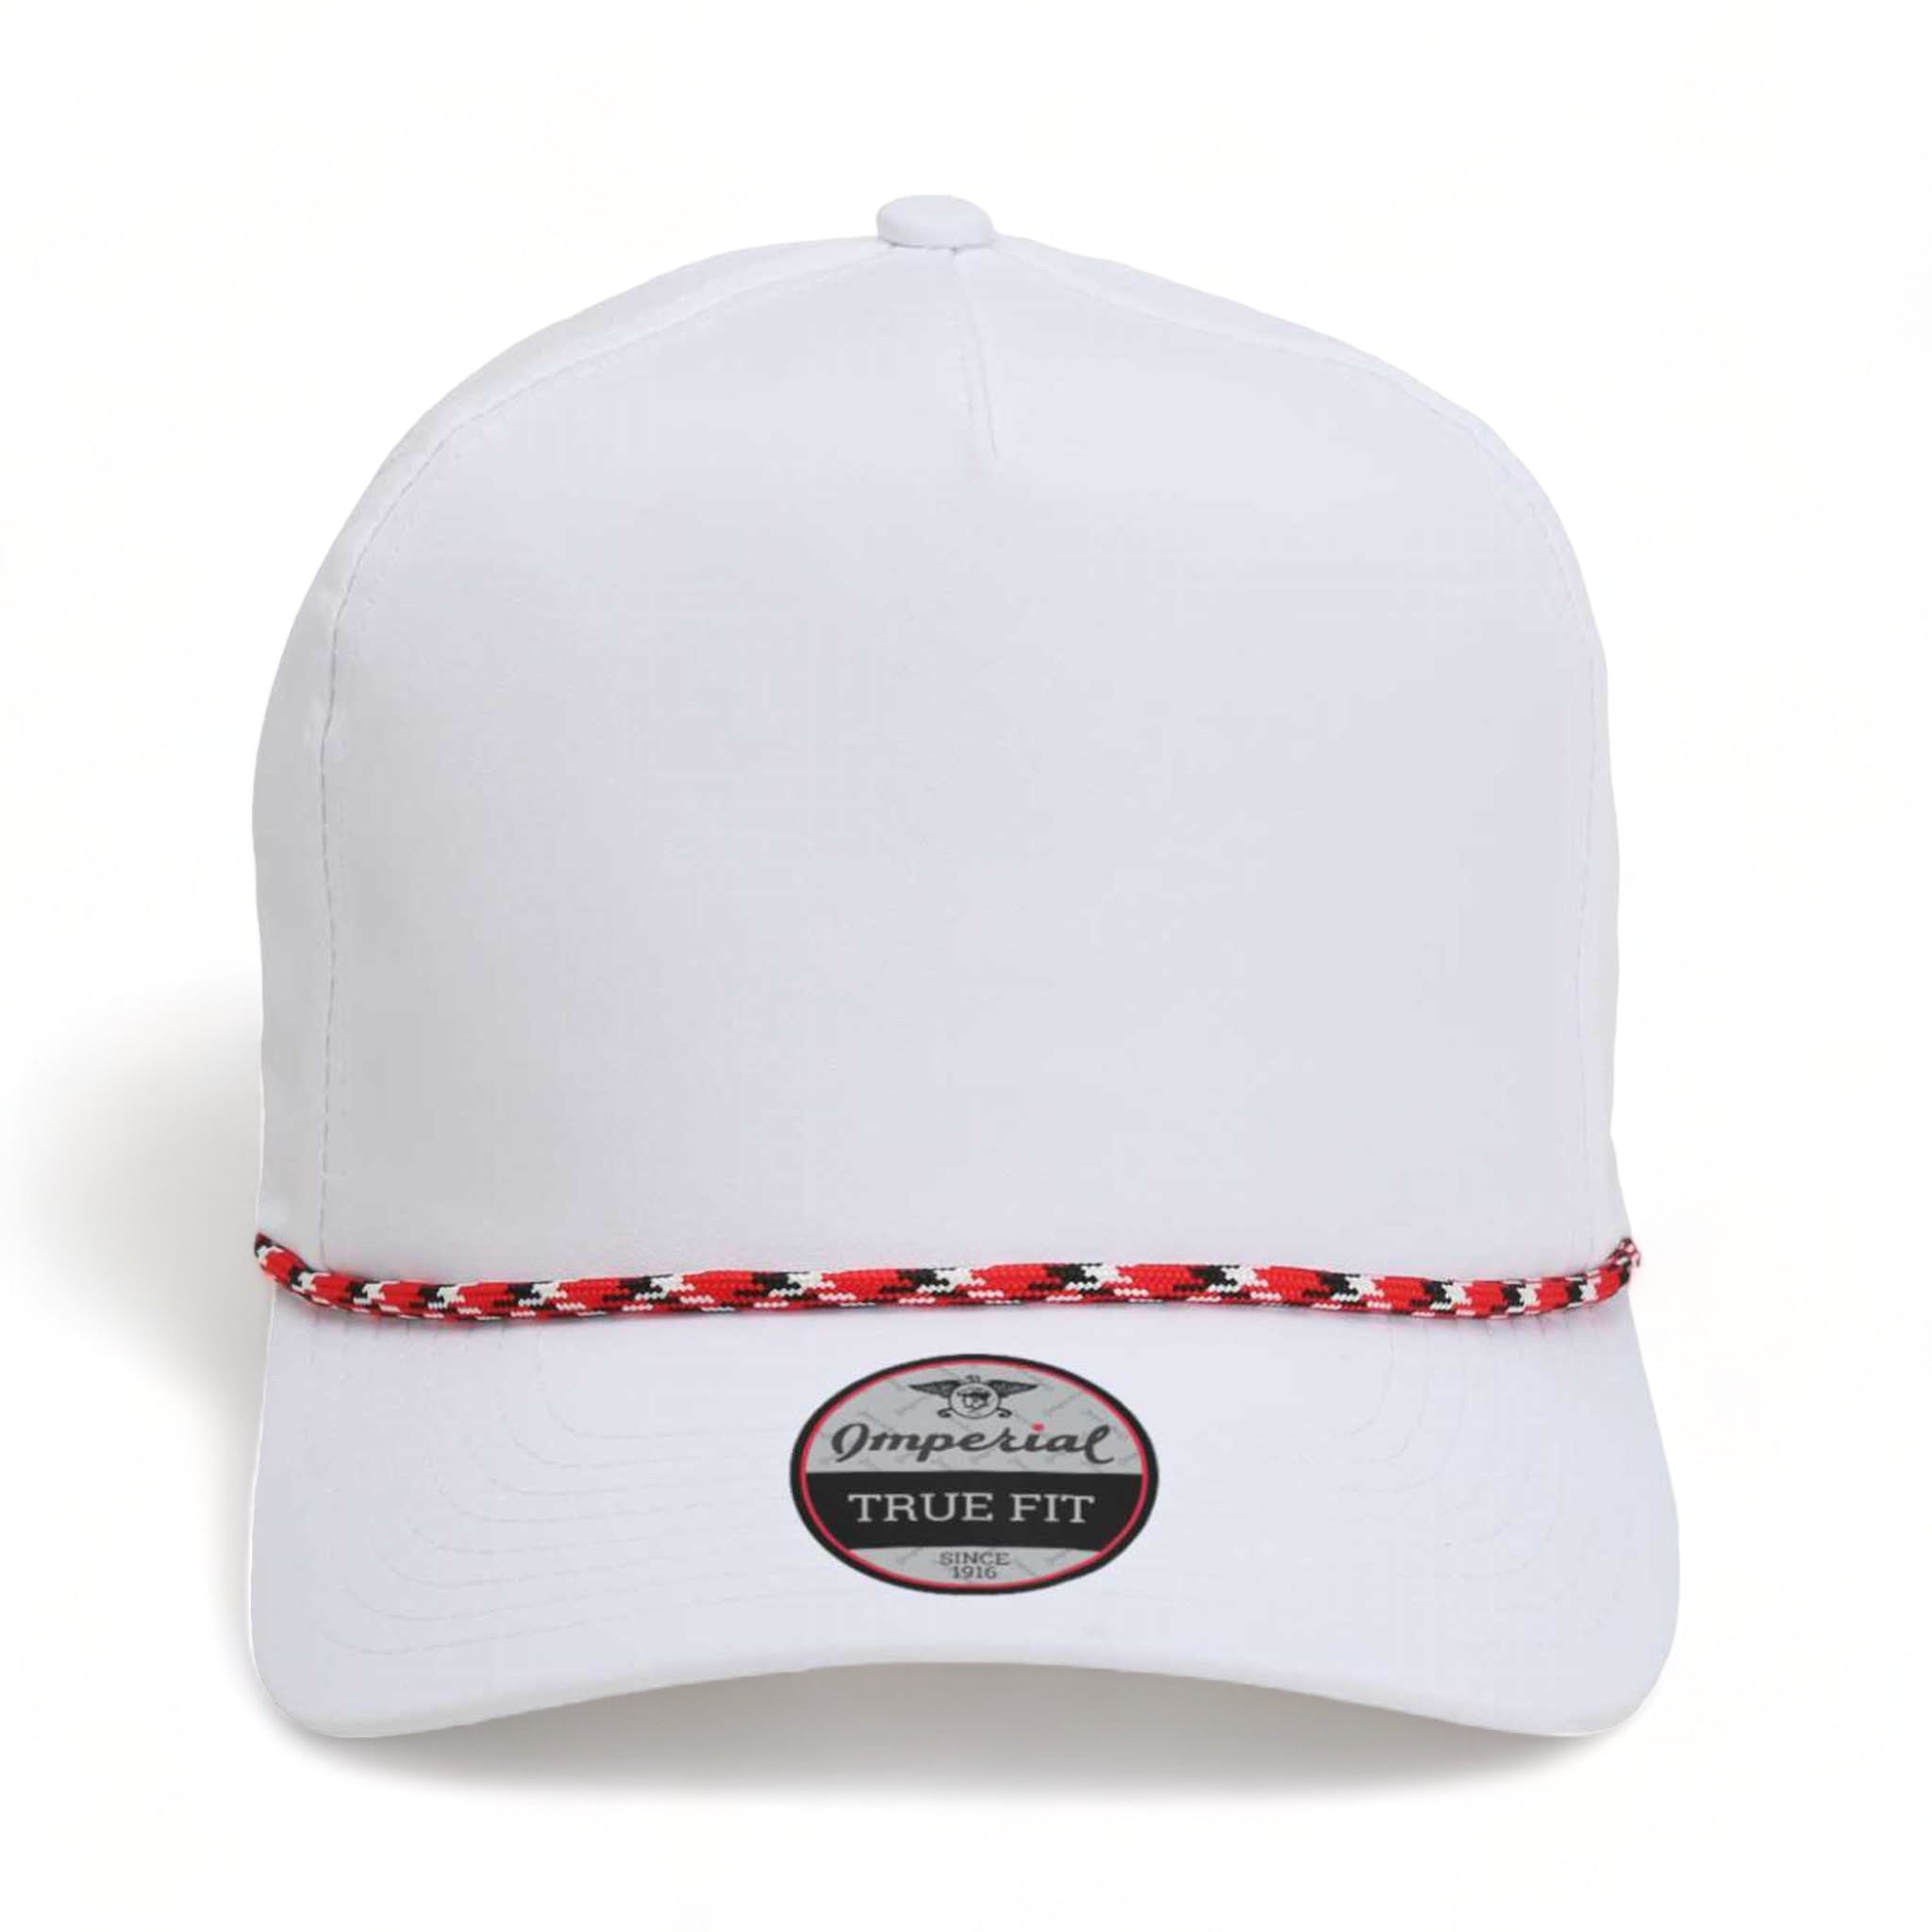 Front view of Imperial 5054 custom hat in white and red-black